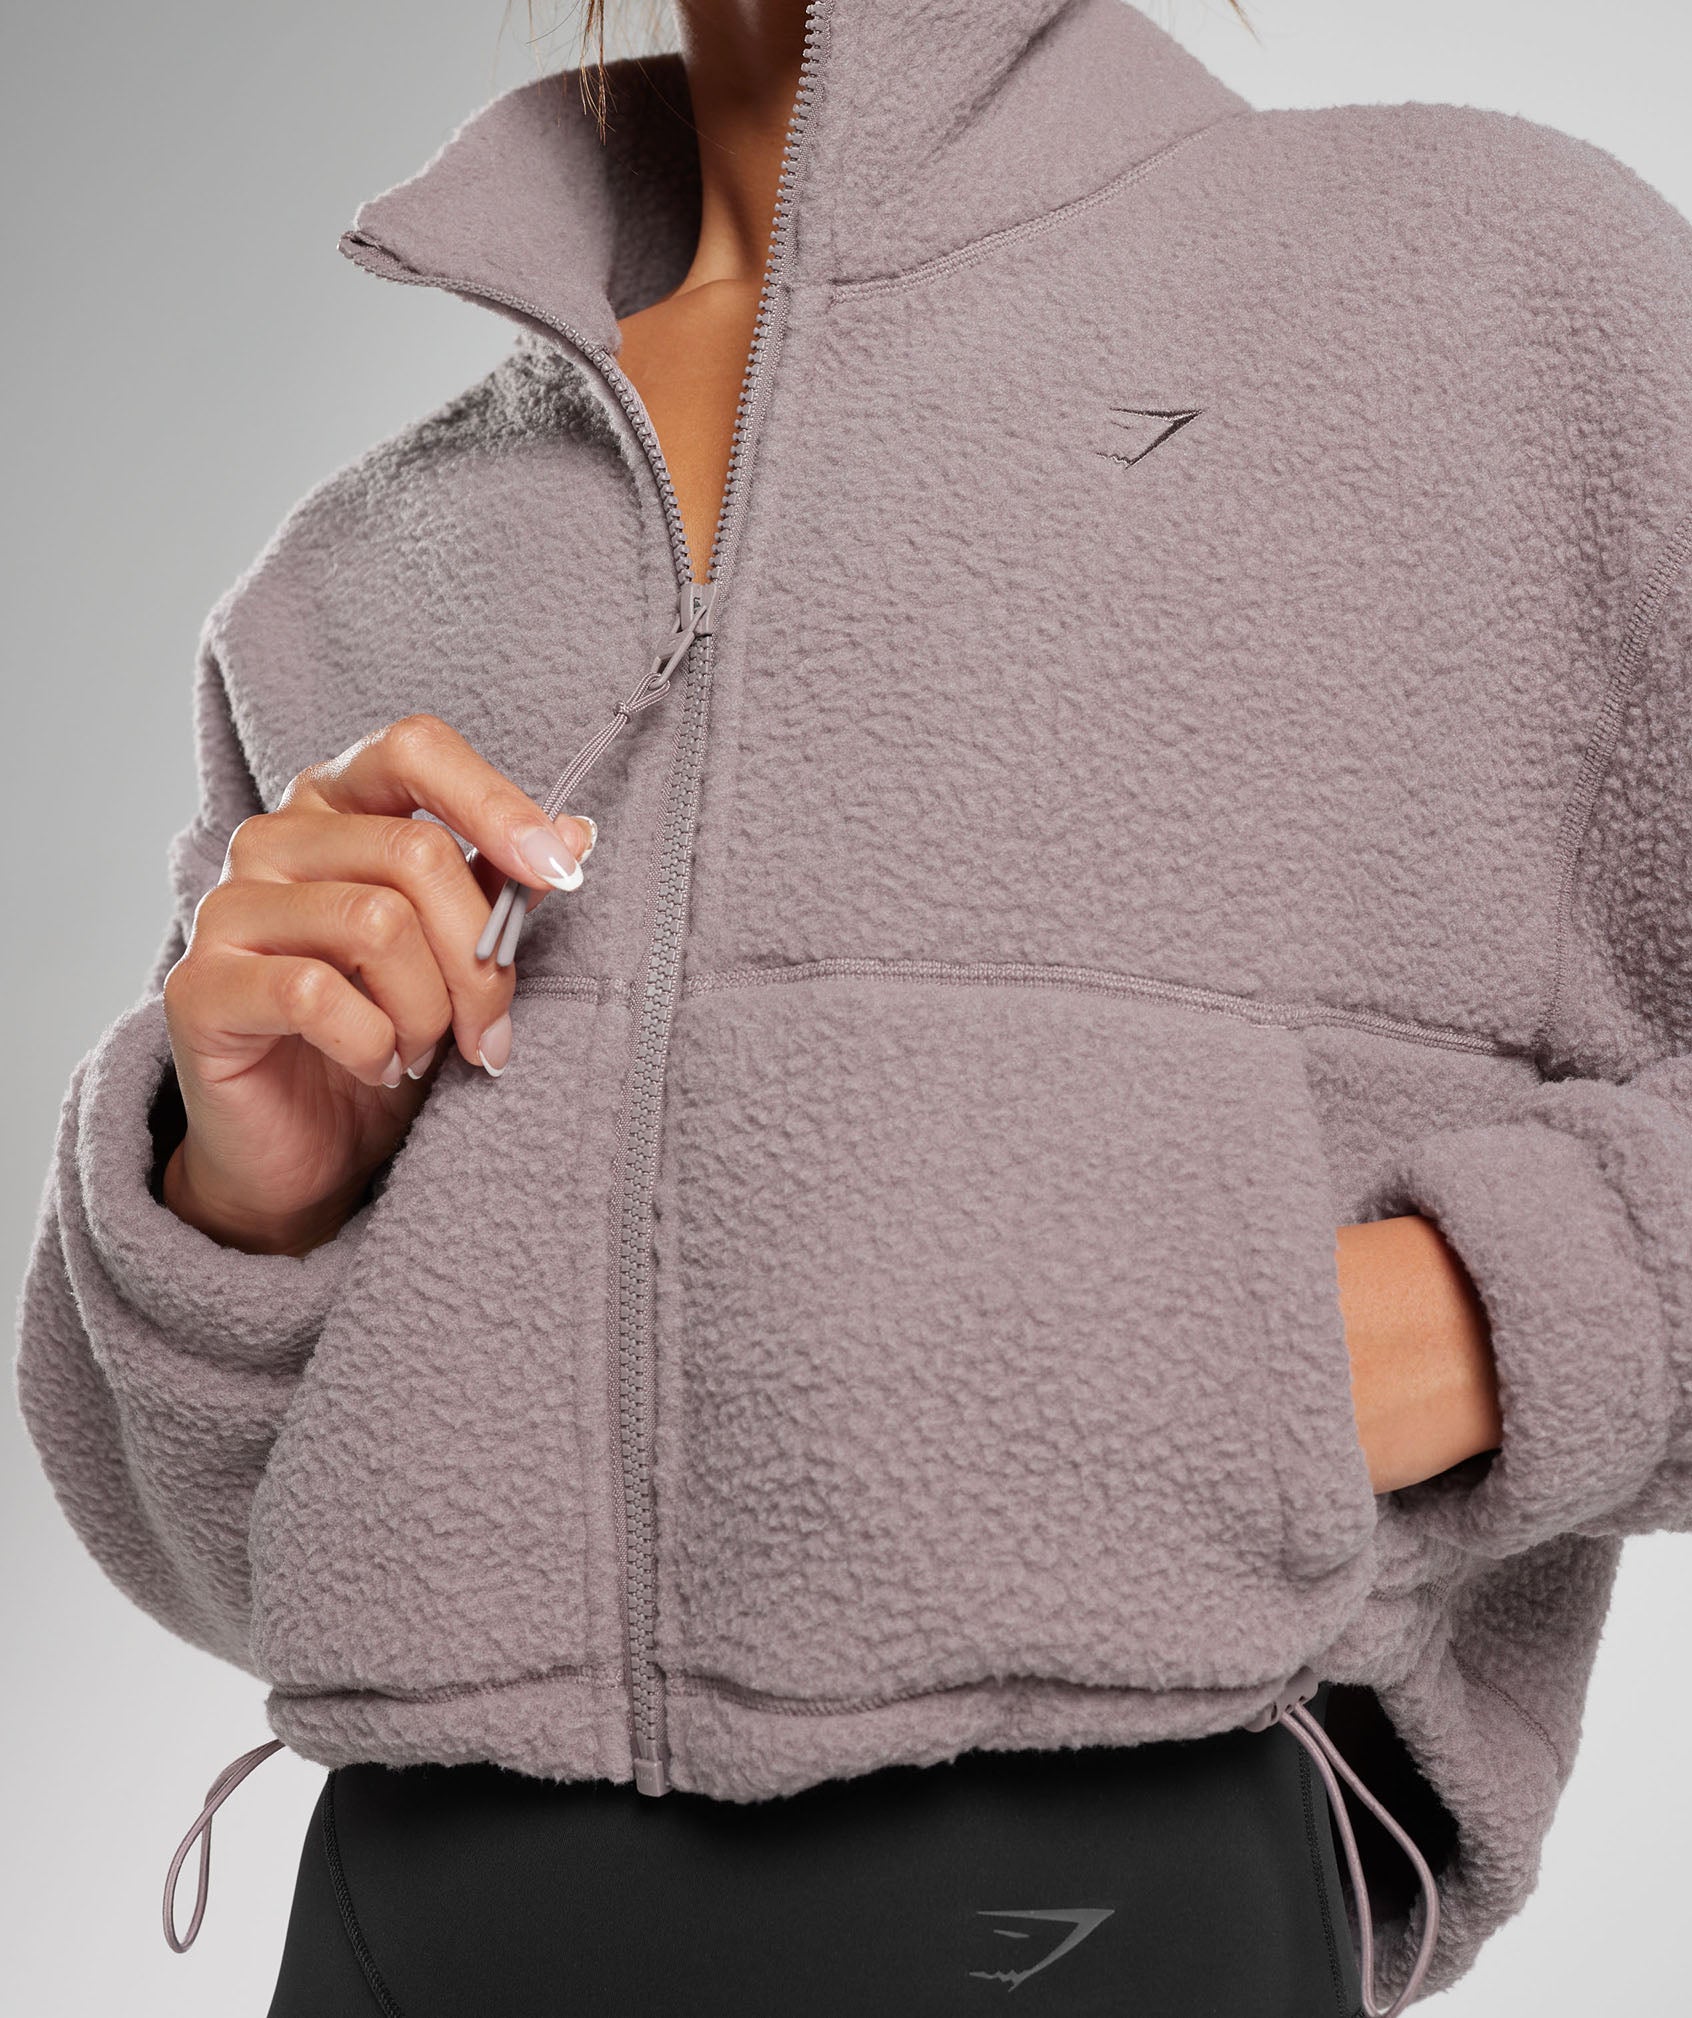 Elevate Fleece Midi Jacket in Washed Mauve - view 6